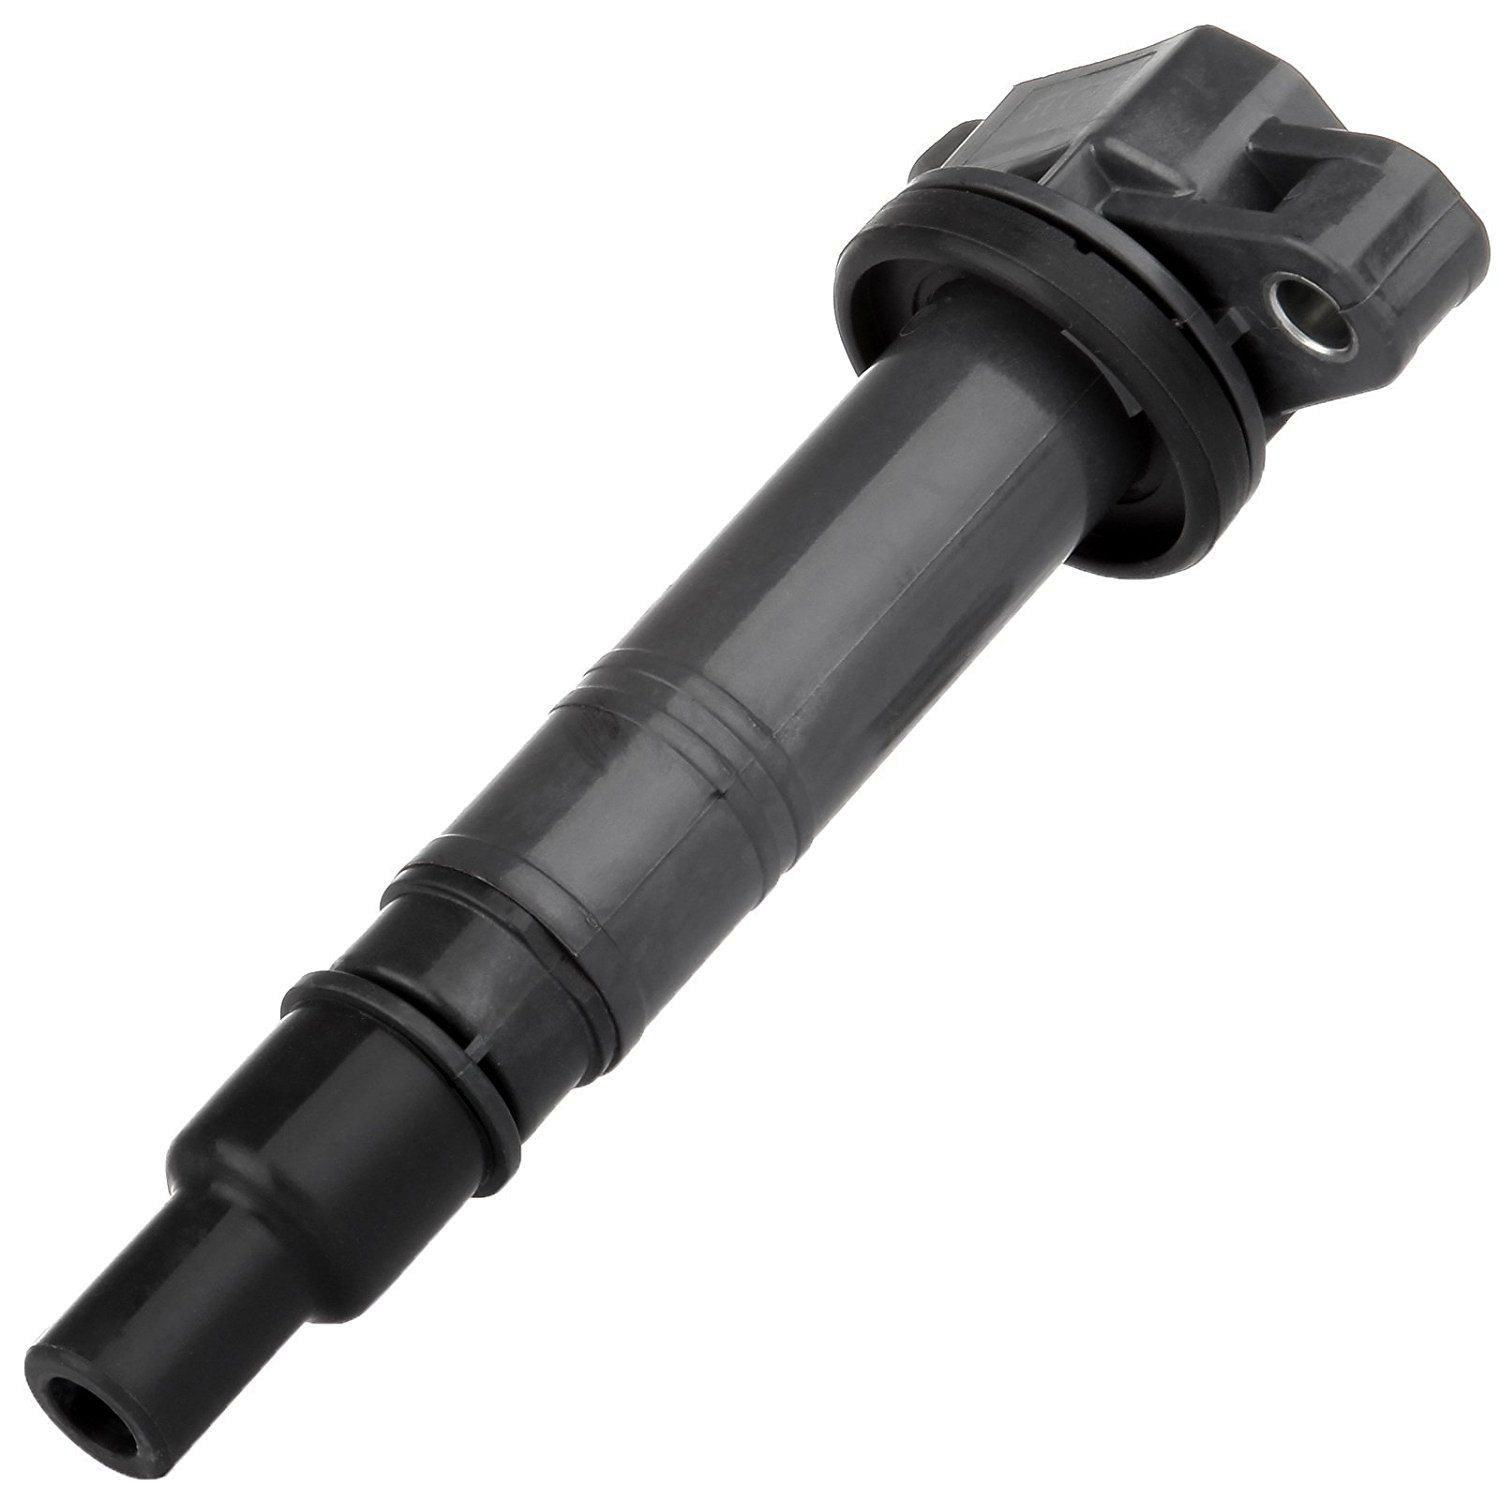 Ignition Coil for Toyota Tacoma/Corolla/Camry/4runner/Highlander 90919-A2006 90919-02248 90919-02247 90919-A2001 90919-C2002